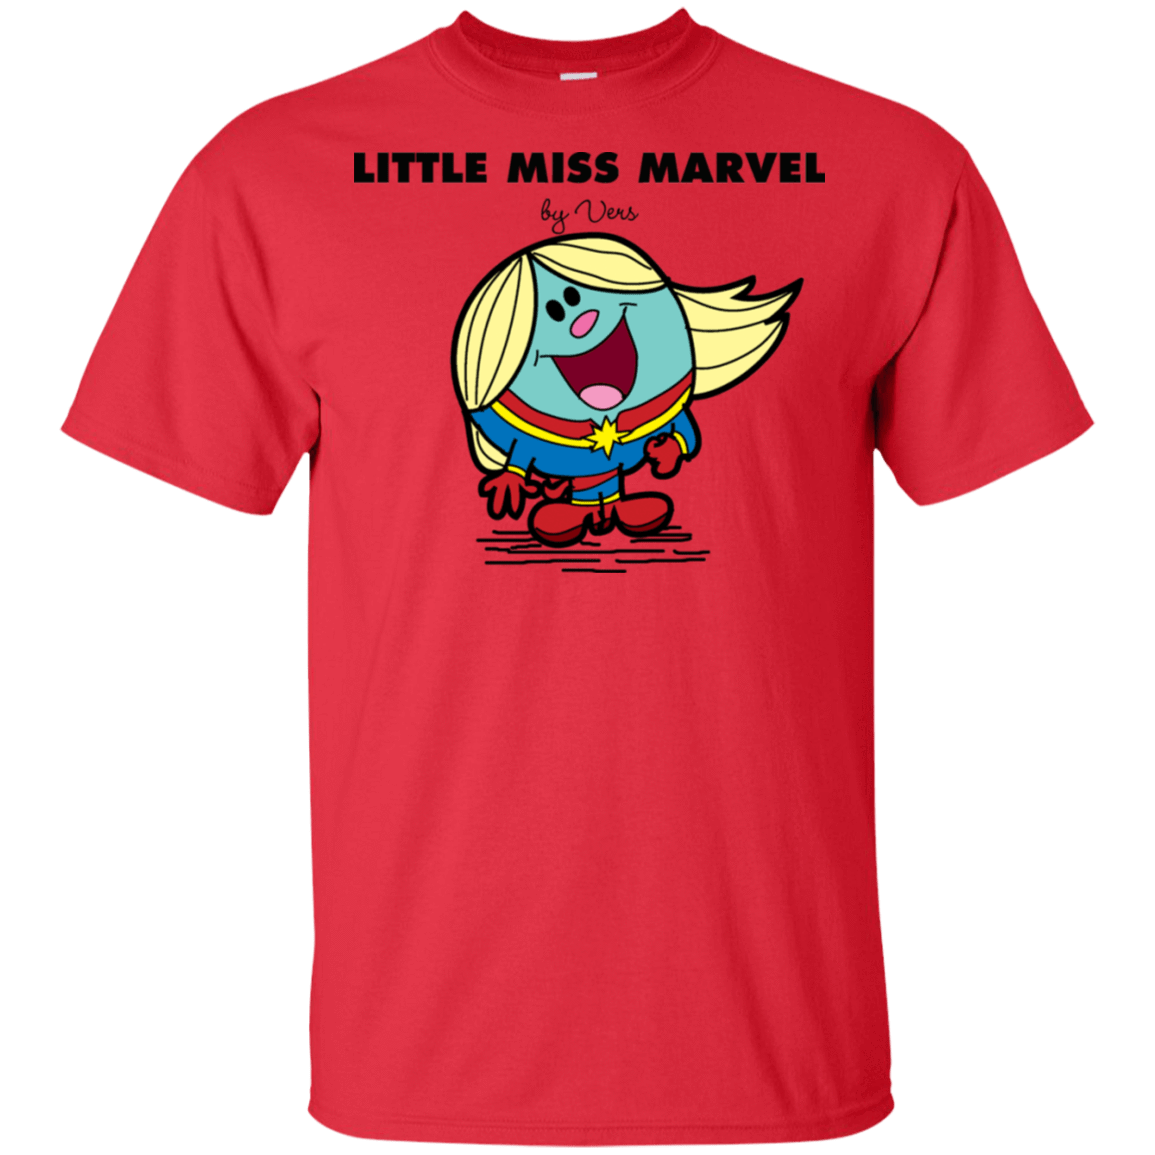 T-Shirts Red / S Little Miss Marvel T-Shirt